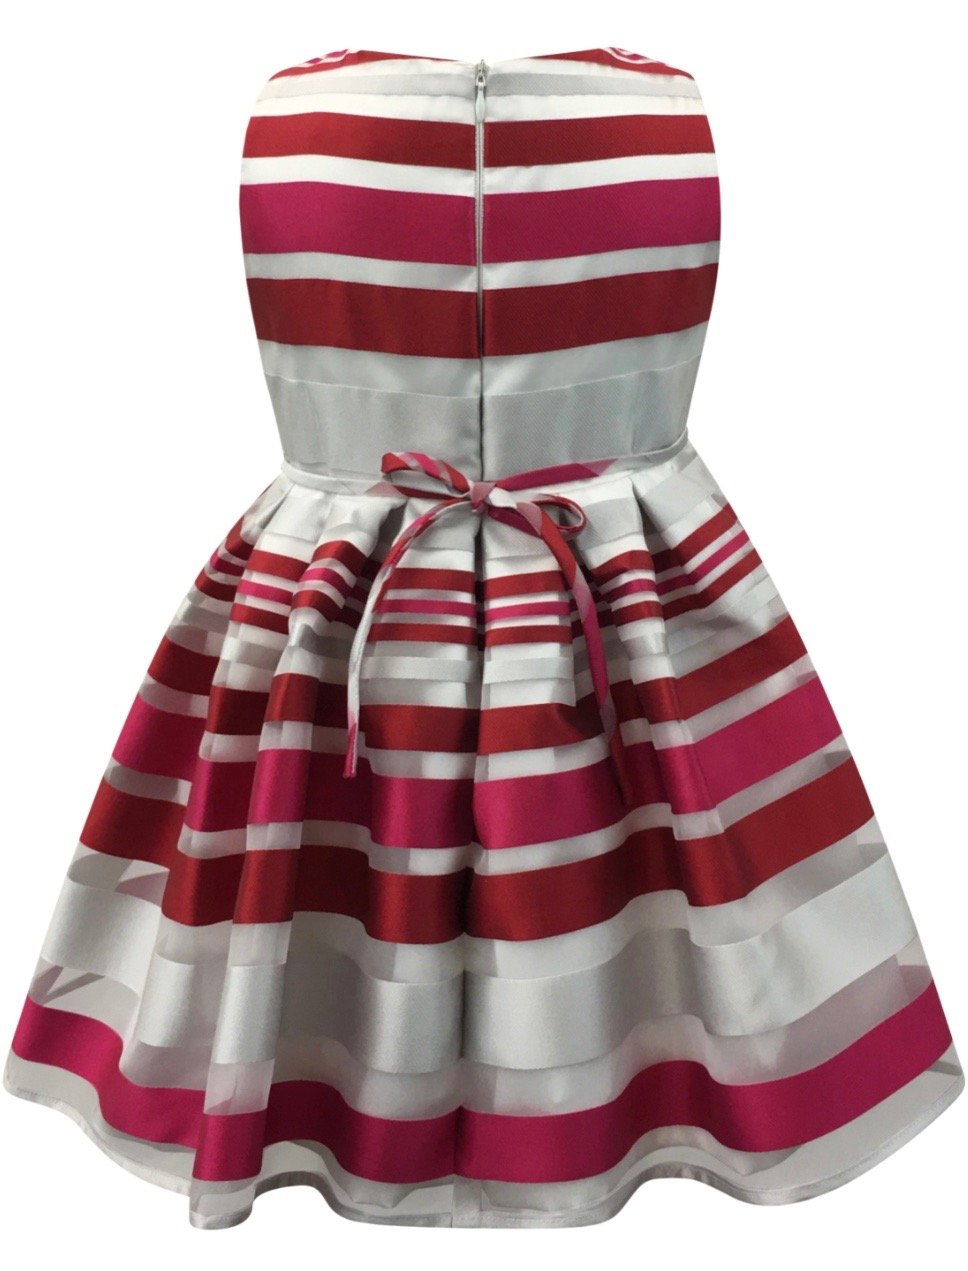 Helena and Harry Girl's Red and Fuchsia Satin Striped Organza Dress